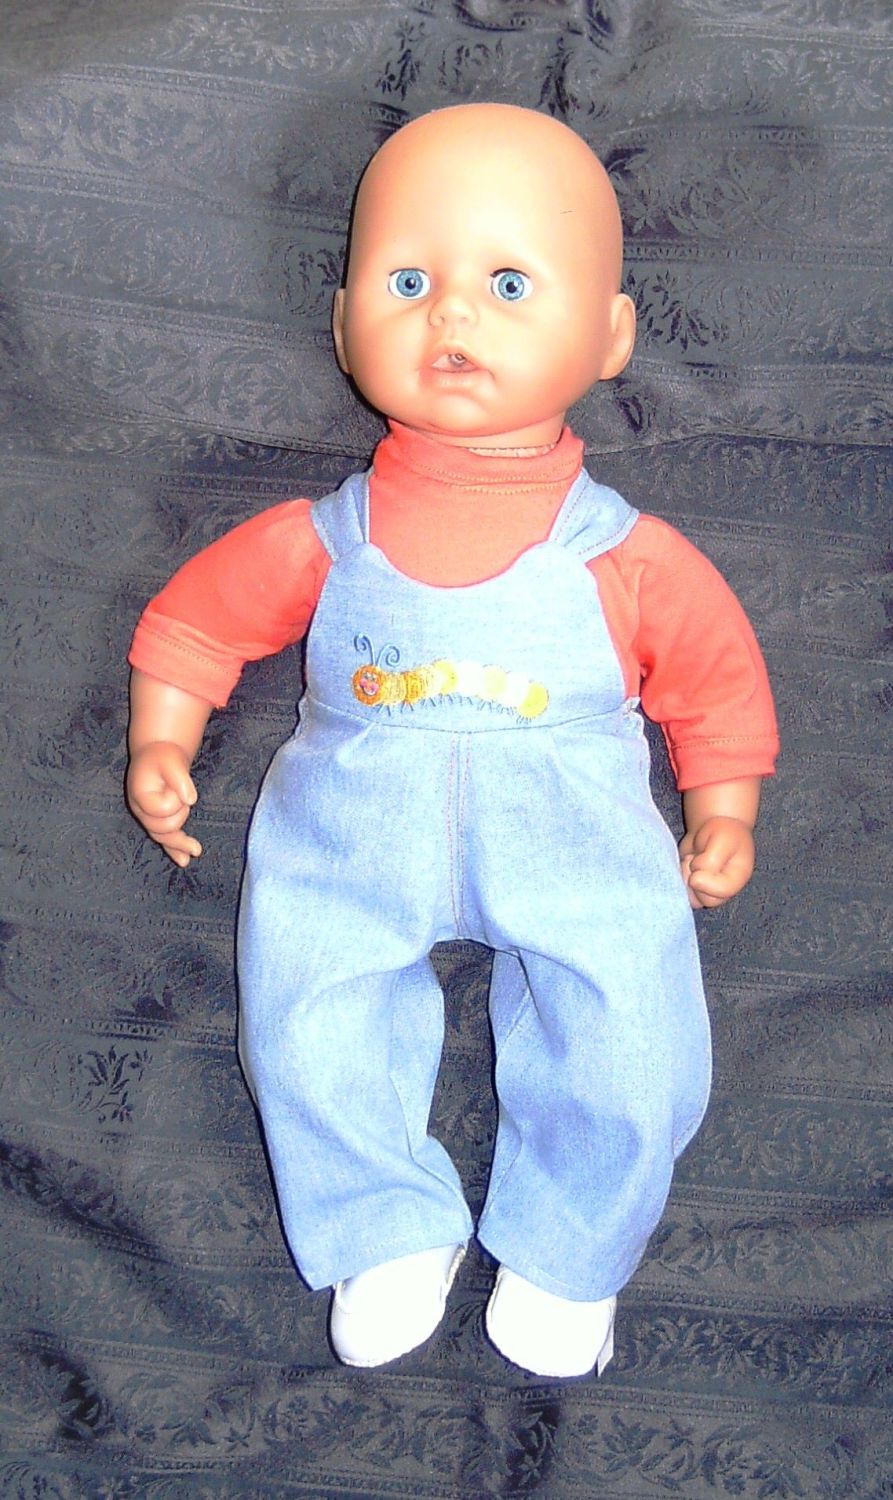 Doll's dungarees and tee shirt to fit 18 inch high George doll